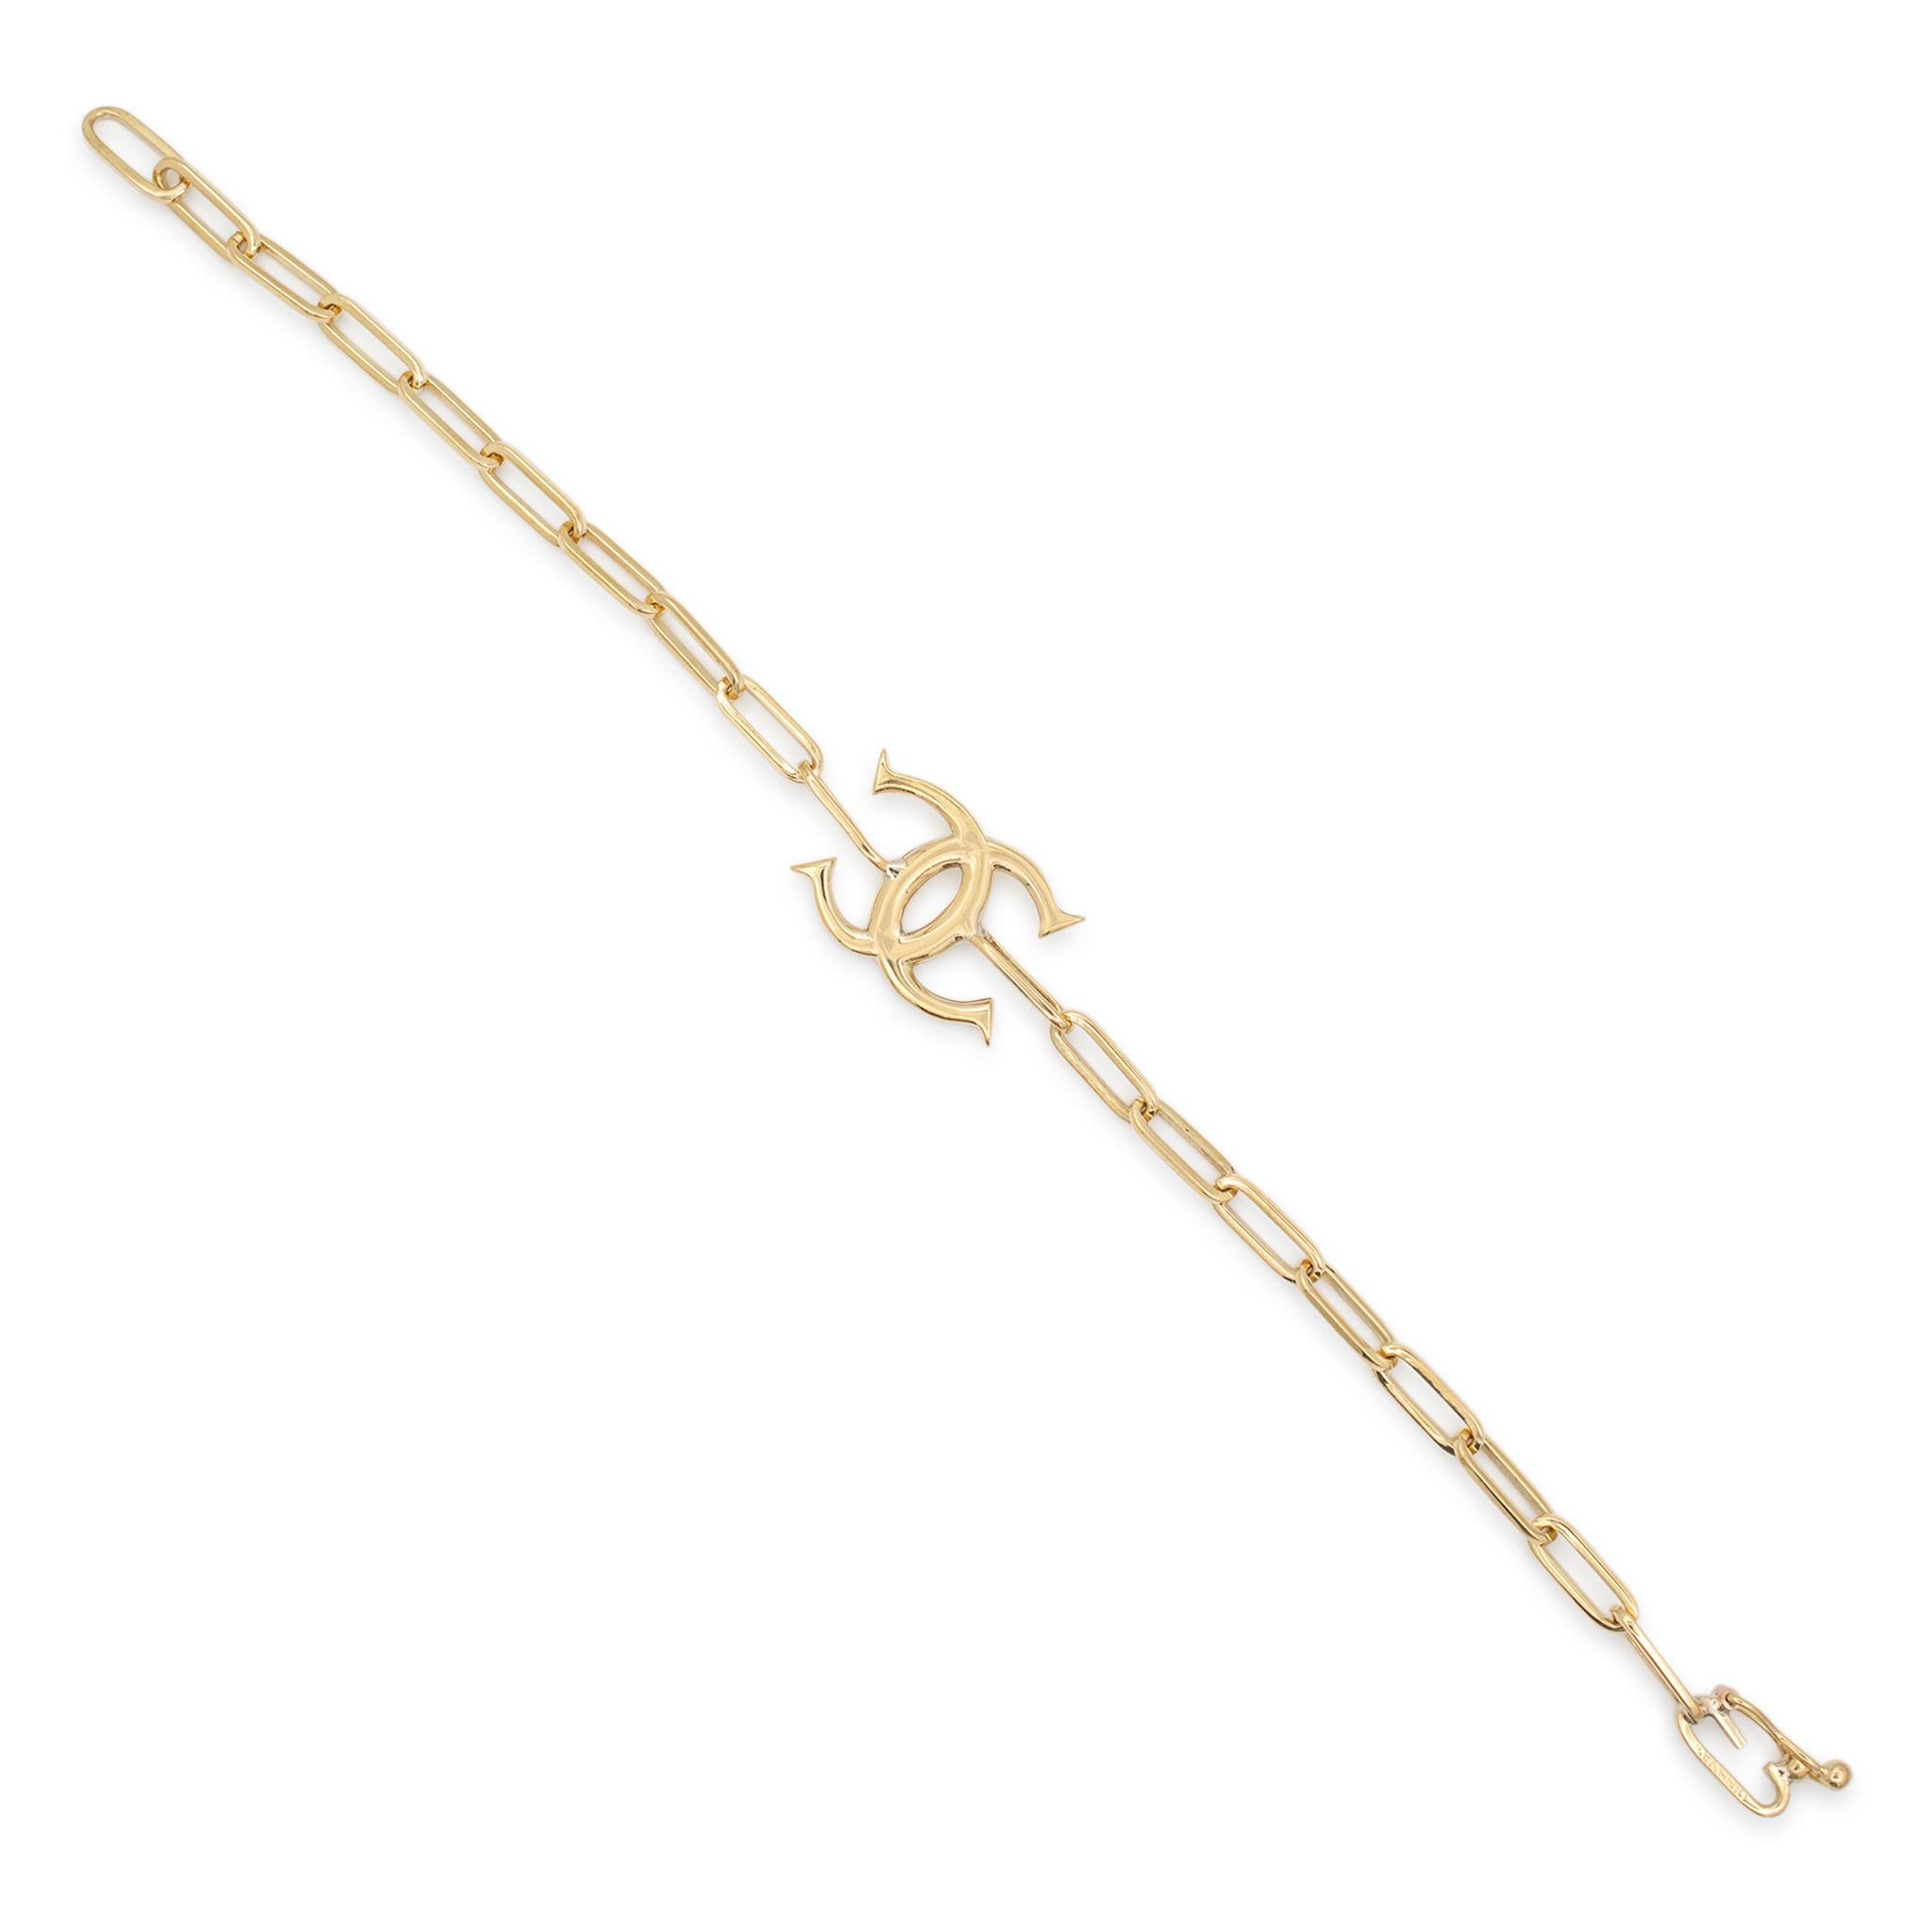 Vintage Cartier 18K Yellow Gold Spartacus Double-C Chain Bracelet In Excellent Condition For Sale In Houston, TX